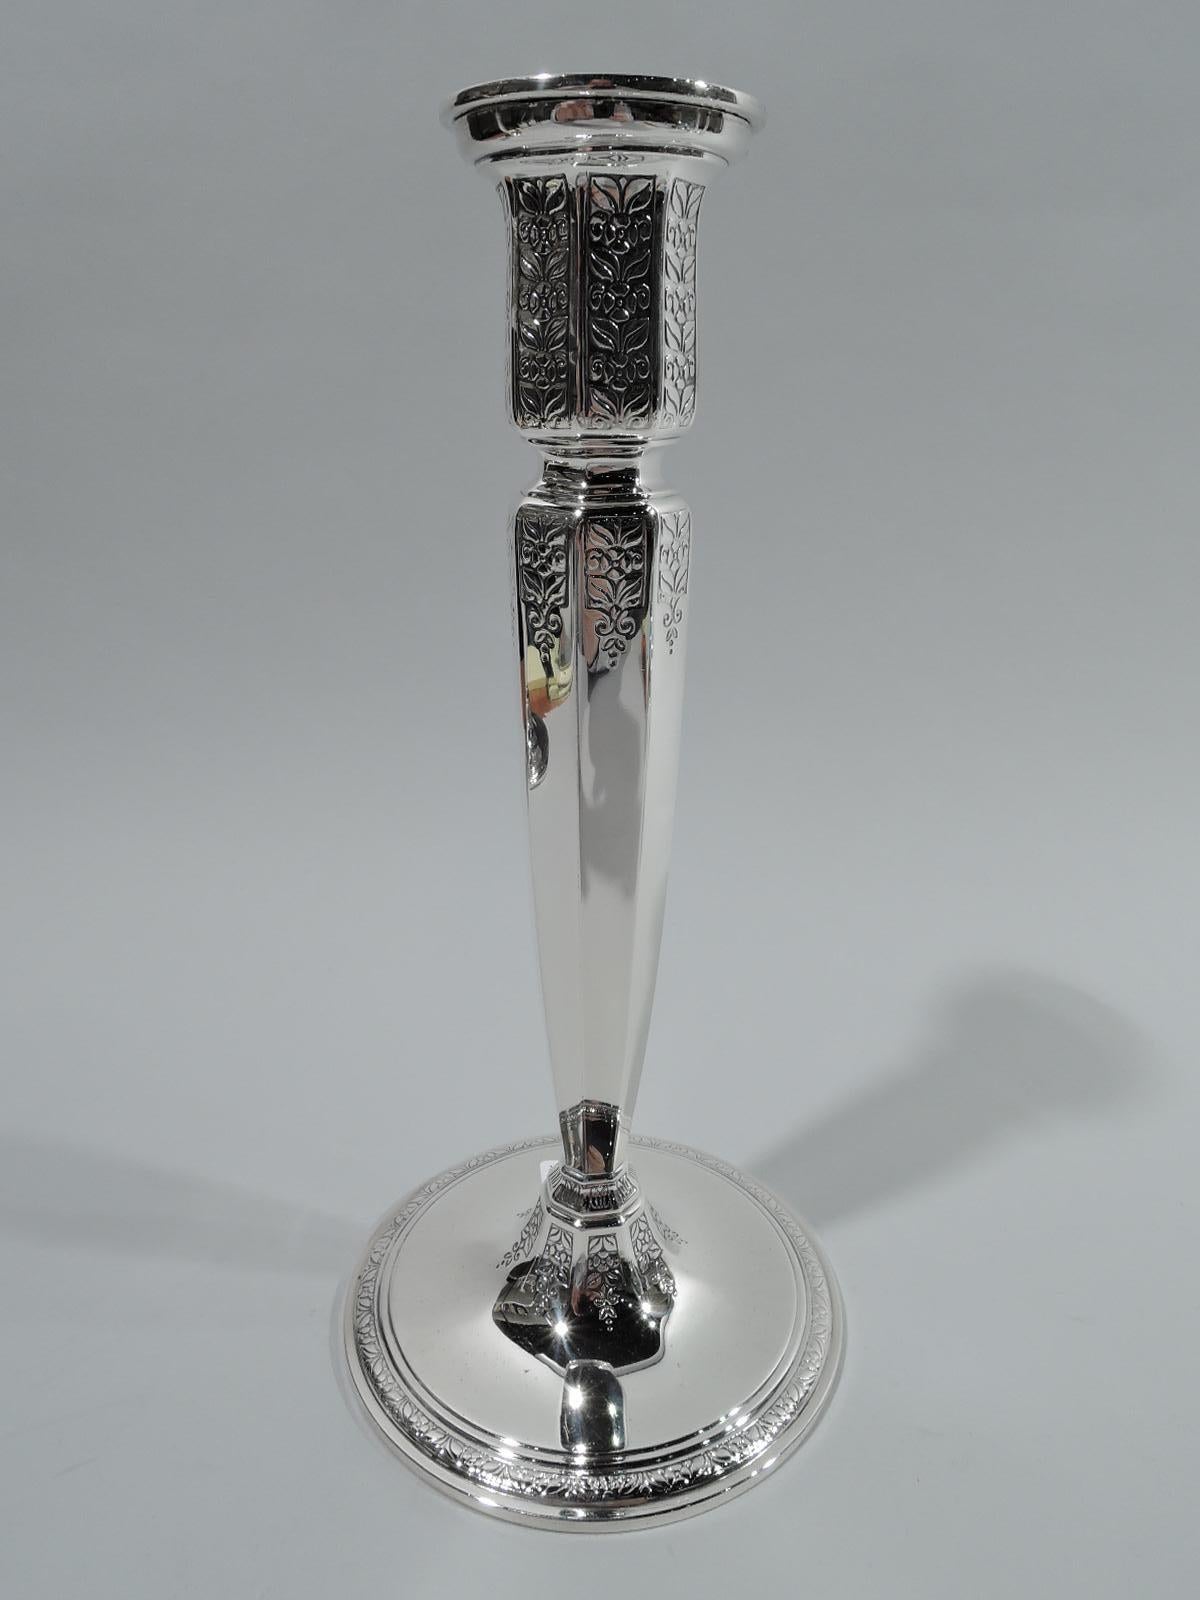 Pair of Art Deco sterling silver candlesticks. Made by Tiffany & Co. in New York, ca 1924. Each: tapering and faceted shaft mounted to raised and banded circular foot. Shaft top inset and surmounted by straight and faceted socket. Detachable